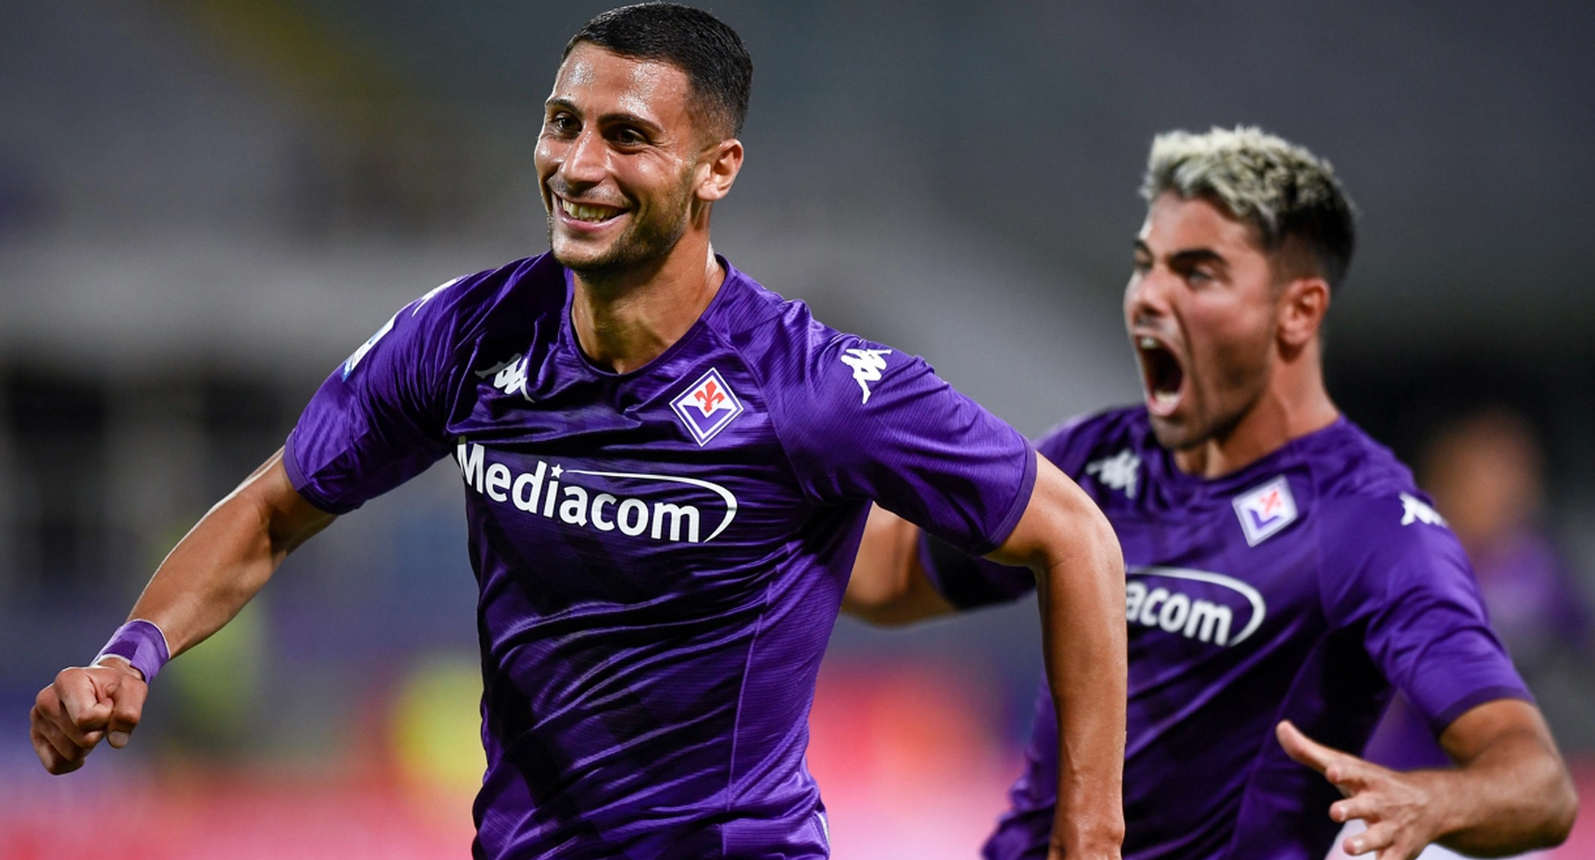 Fiorentina started their Conference League campaign on the right foot as they beat Twente 2-1 in the playoff first leg at the Artemio Franchi Stadium